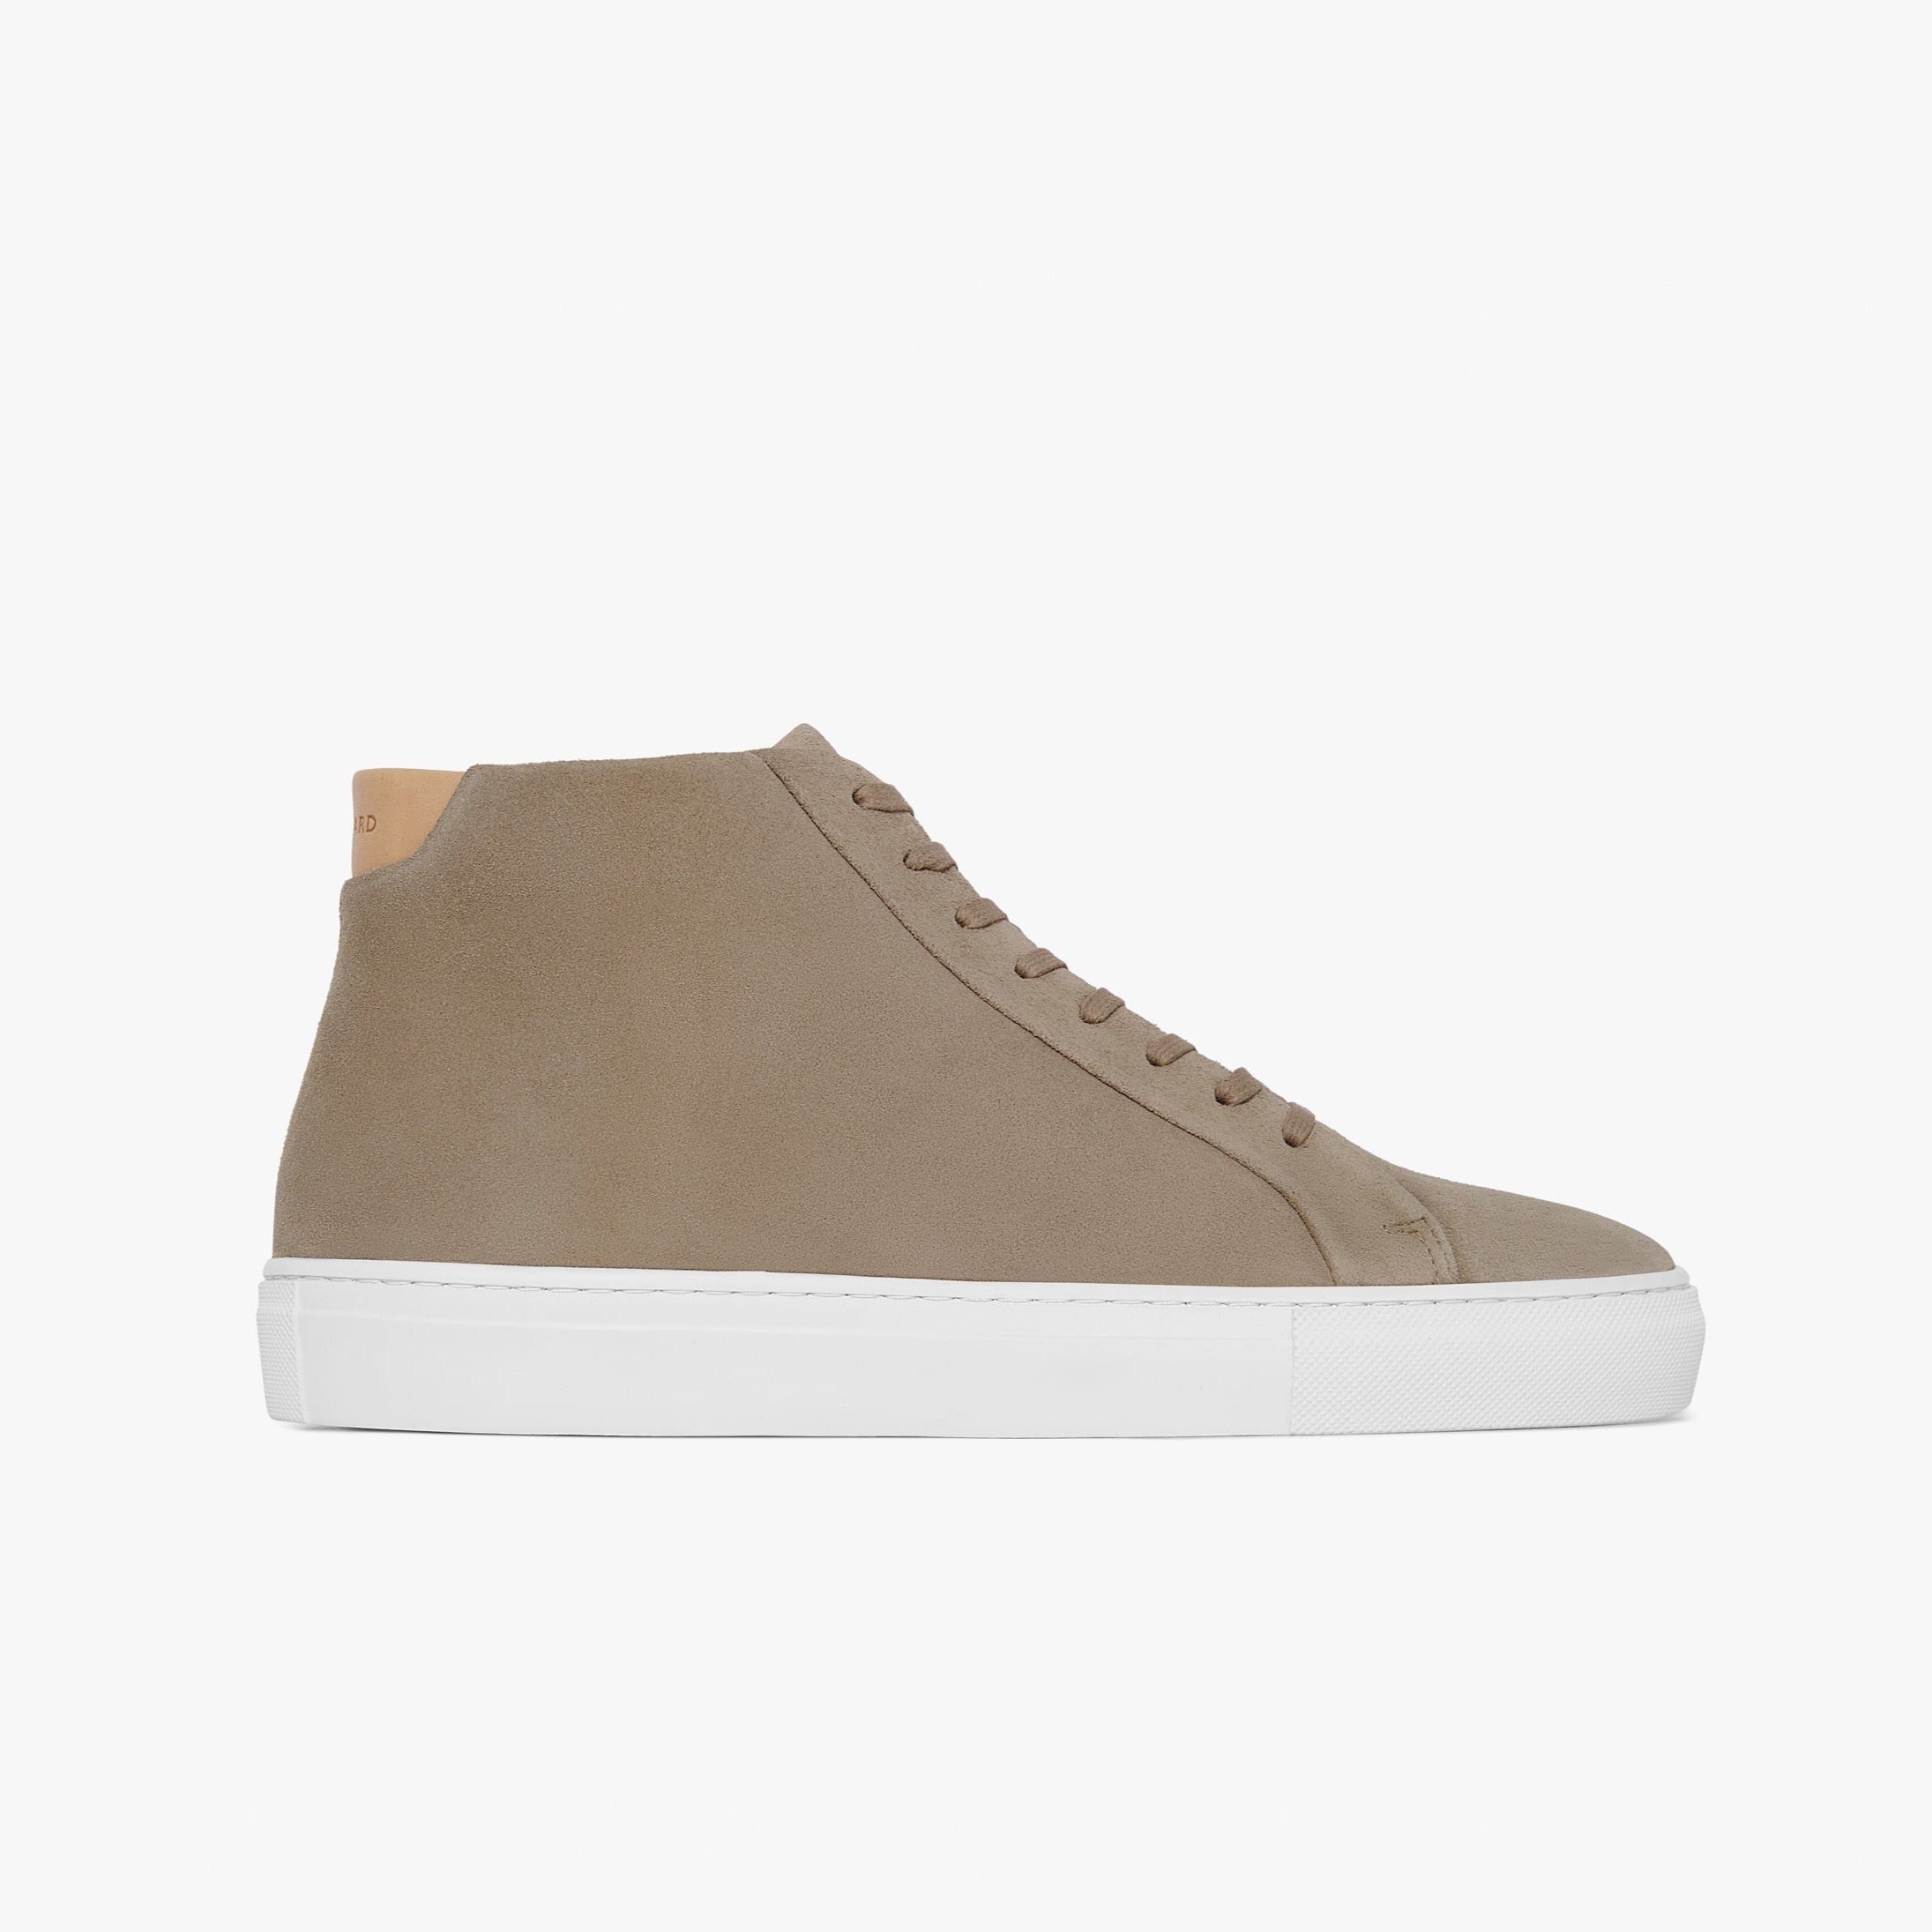 Series 4 Fawn Suede Womens